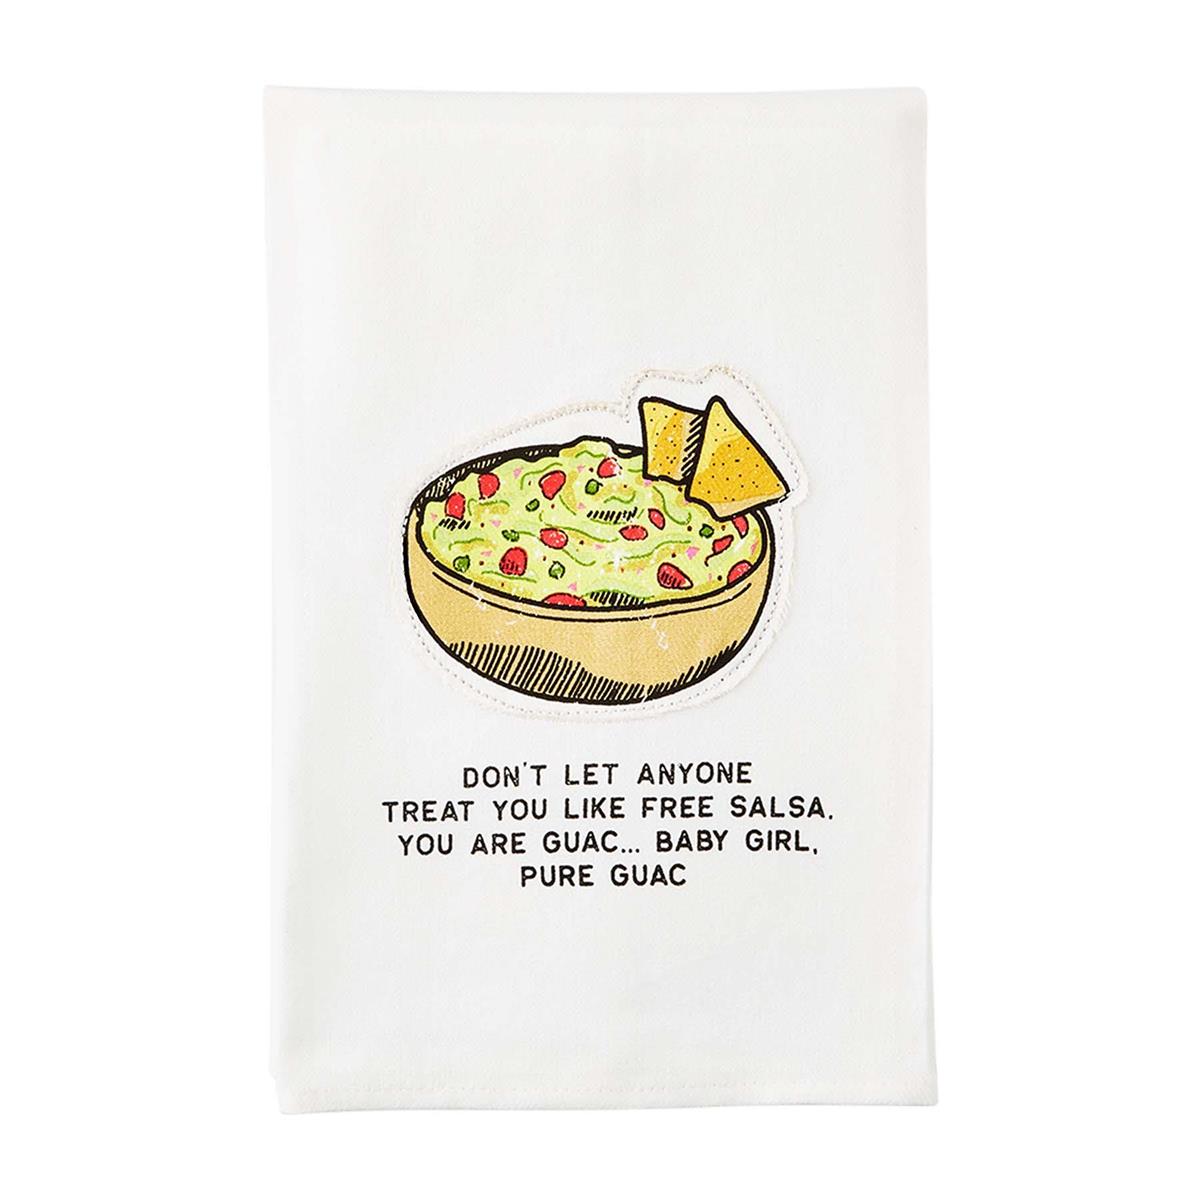 guac fiesta appliqued towel with bowl of guac graphic and text "don't let anyone treat you like free salsa. you are guac... baby girl. pure guac" on a white background